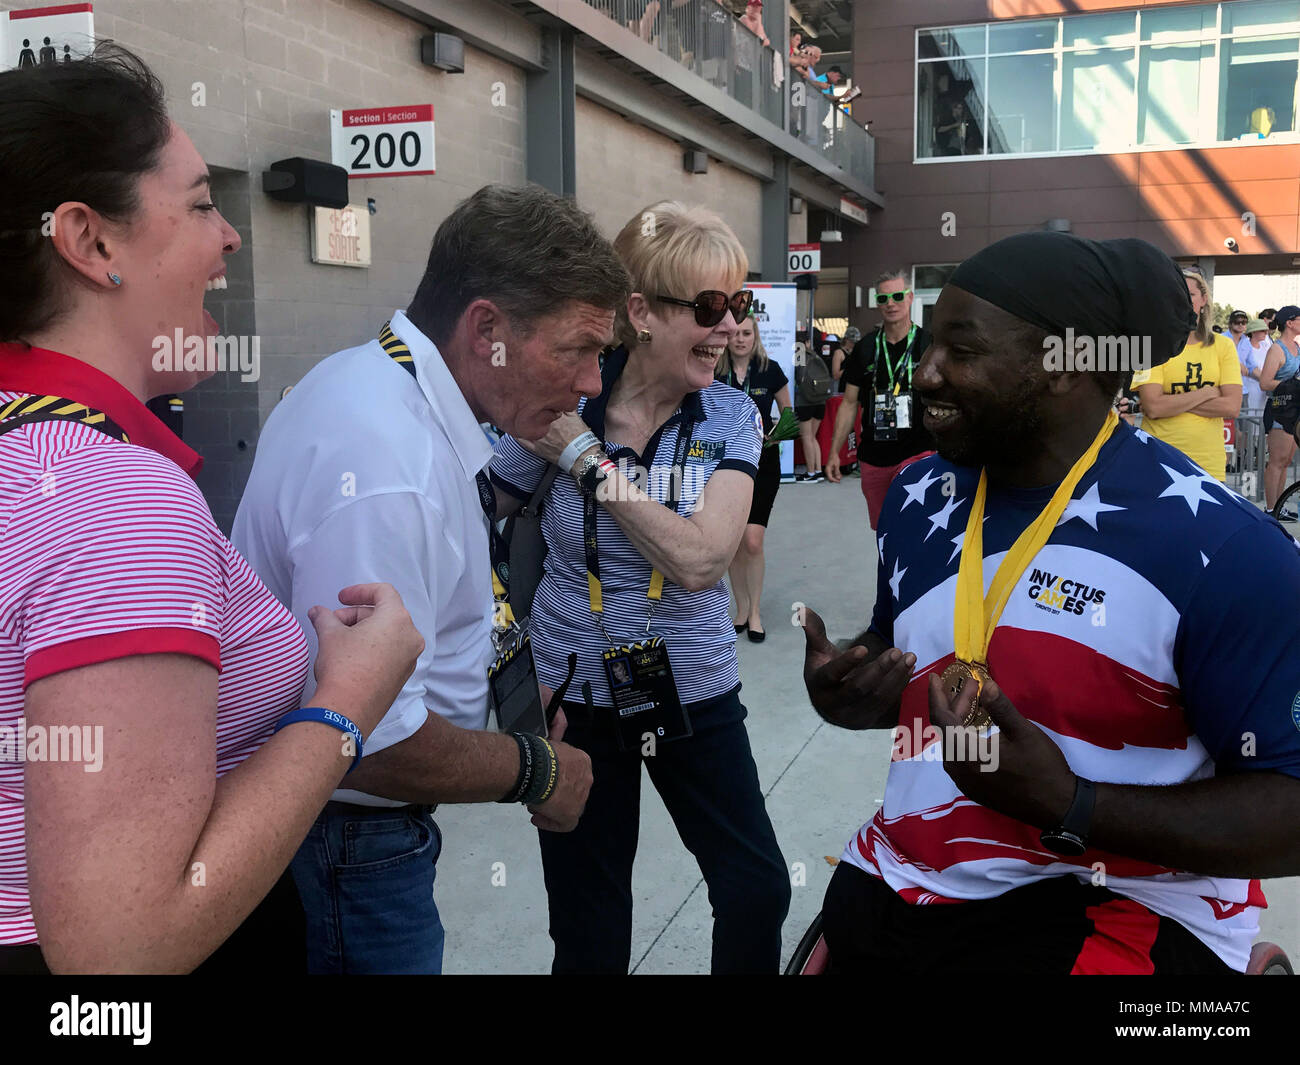 Ken Fisher, CEO and founder of Fisher House, jokes with medically retired Army Spc. Tony Pone, after he earned gold medals in his disability category in the men’s discus and shot put during the 2017 Invictus Games in Toronto Sept. 24, 2017. The Invictus Games, established by Prince Harry in 2014, brings together wounded and injured veterans from 17 nations for 12 adaptive sporting events, including track and field, wheelchair basketball, wheelchair rugby, swimming, sitting volleyball, and new to the 2017 games, golf. (DoD photo by Shannon Collins) Stock Photo